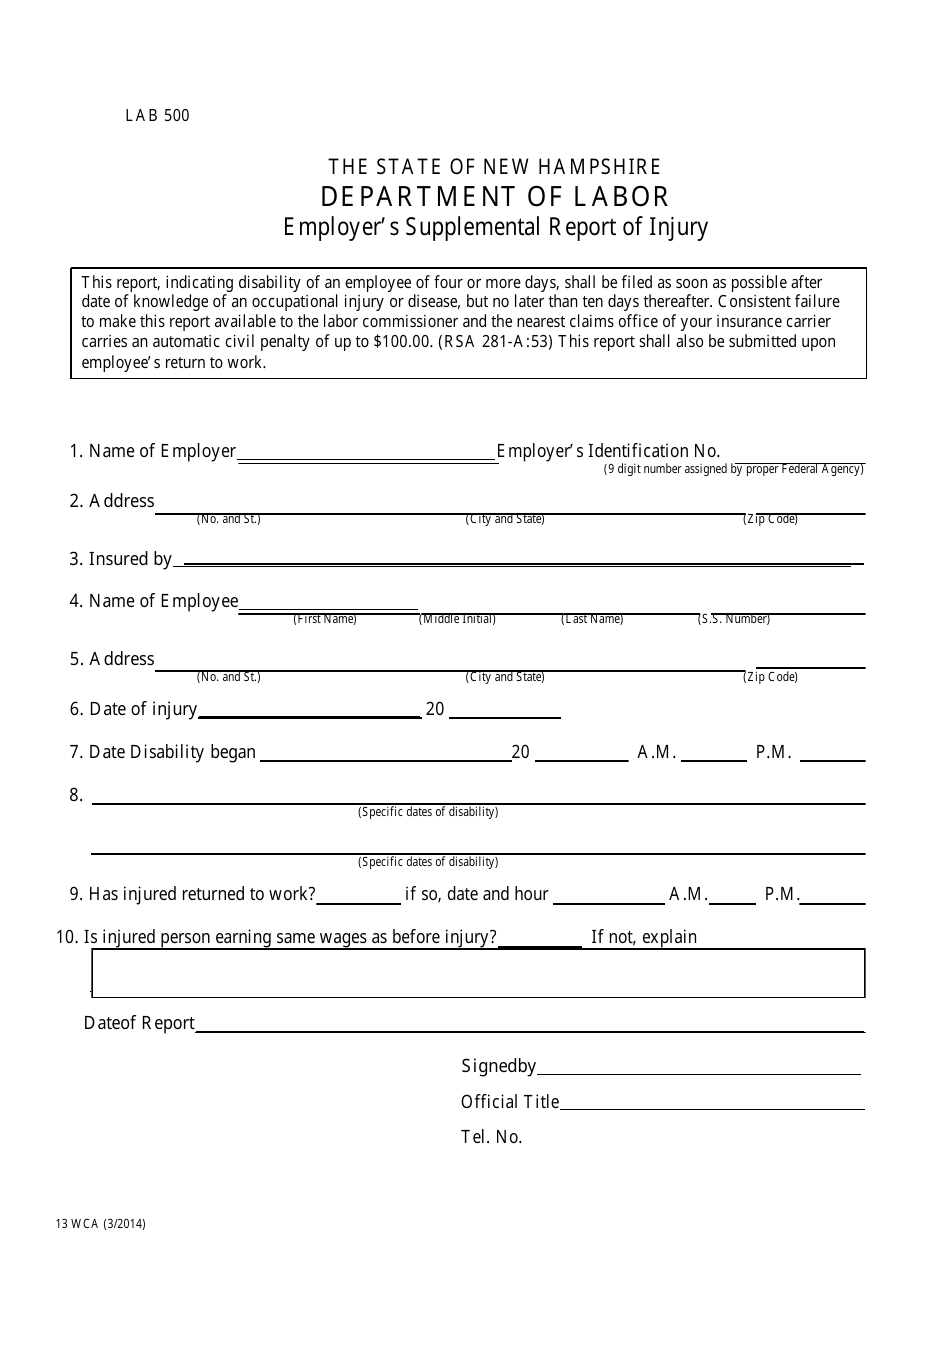 Form 13 WCA Employer's Supplemental Report of Injury - New Hampshire, Page 1